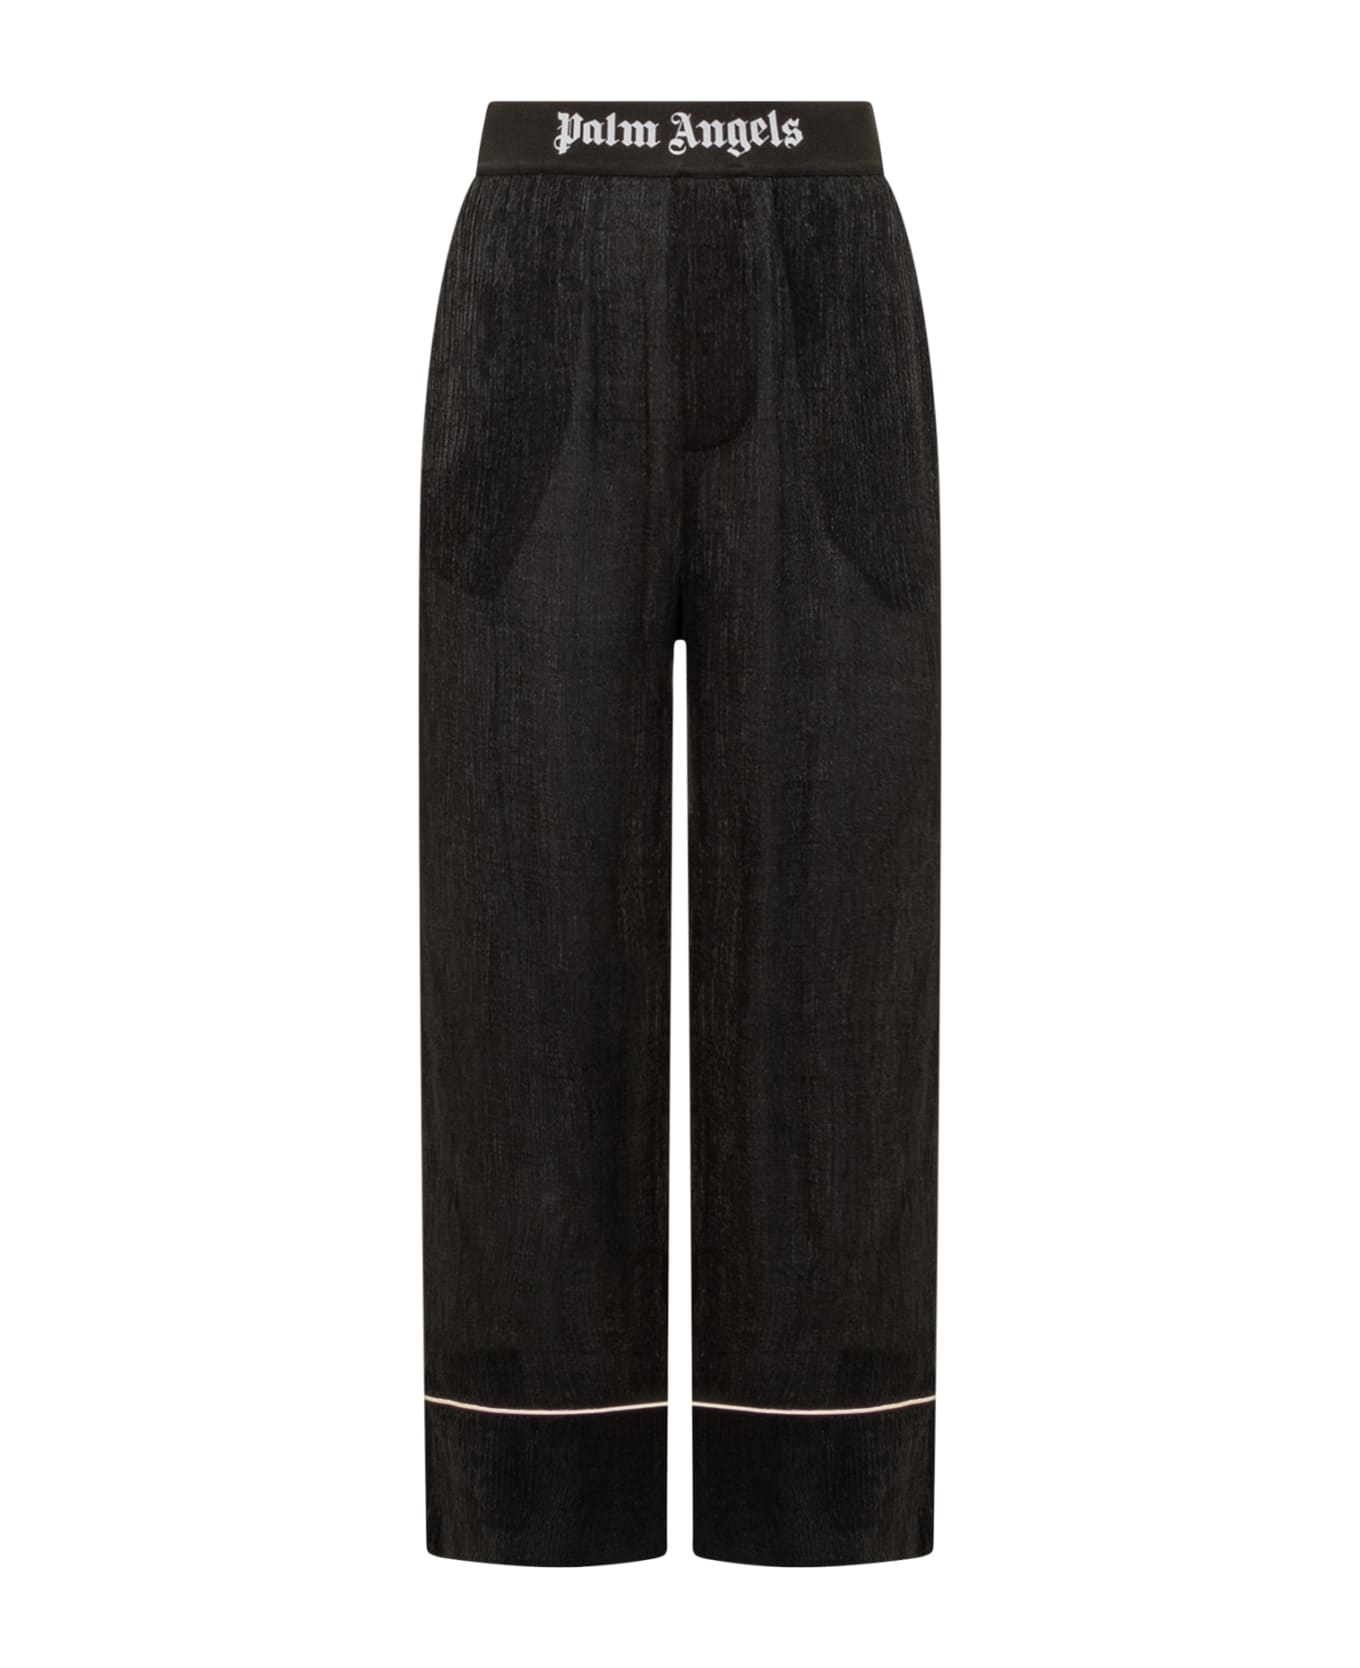 Palm Angels Soiree Pajama Trousers - BLACK GOLD